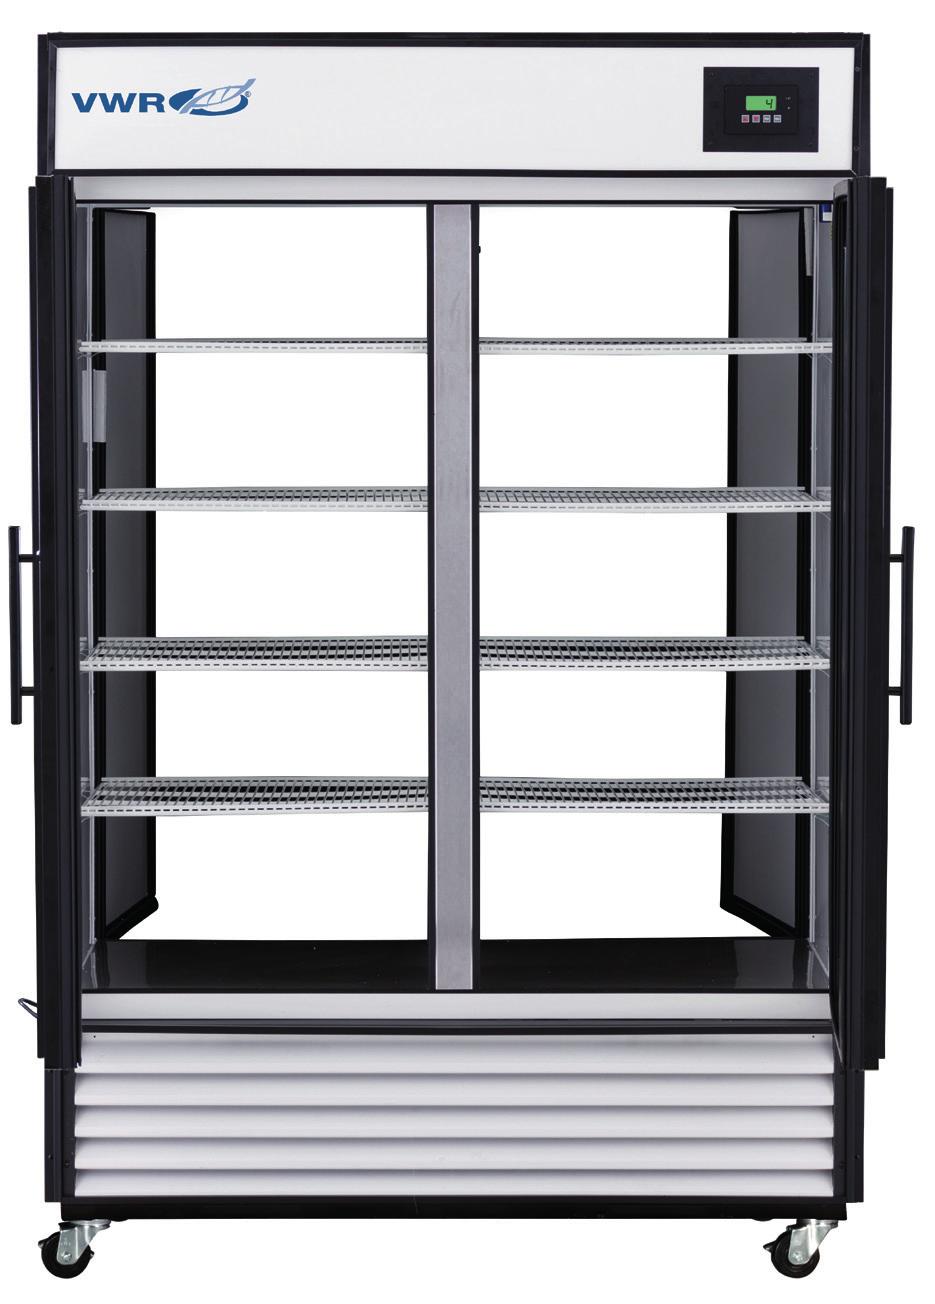 VWR SERIES PASS-THRU LABORATORY REFRIGERATORS WITH NATURAL REFRIGERANTS 1 to 10 C Uniform forced air Directional cooling with oversized evaporators and condensers Available in slide or swing door